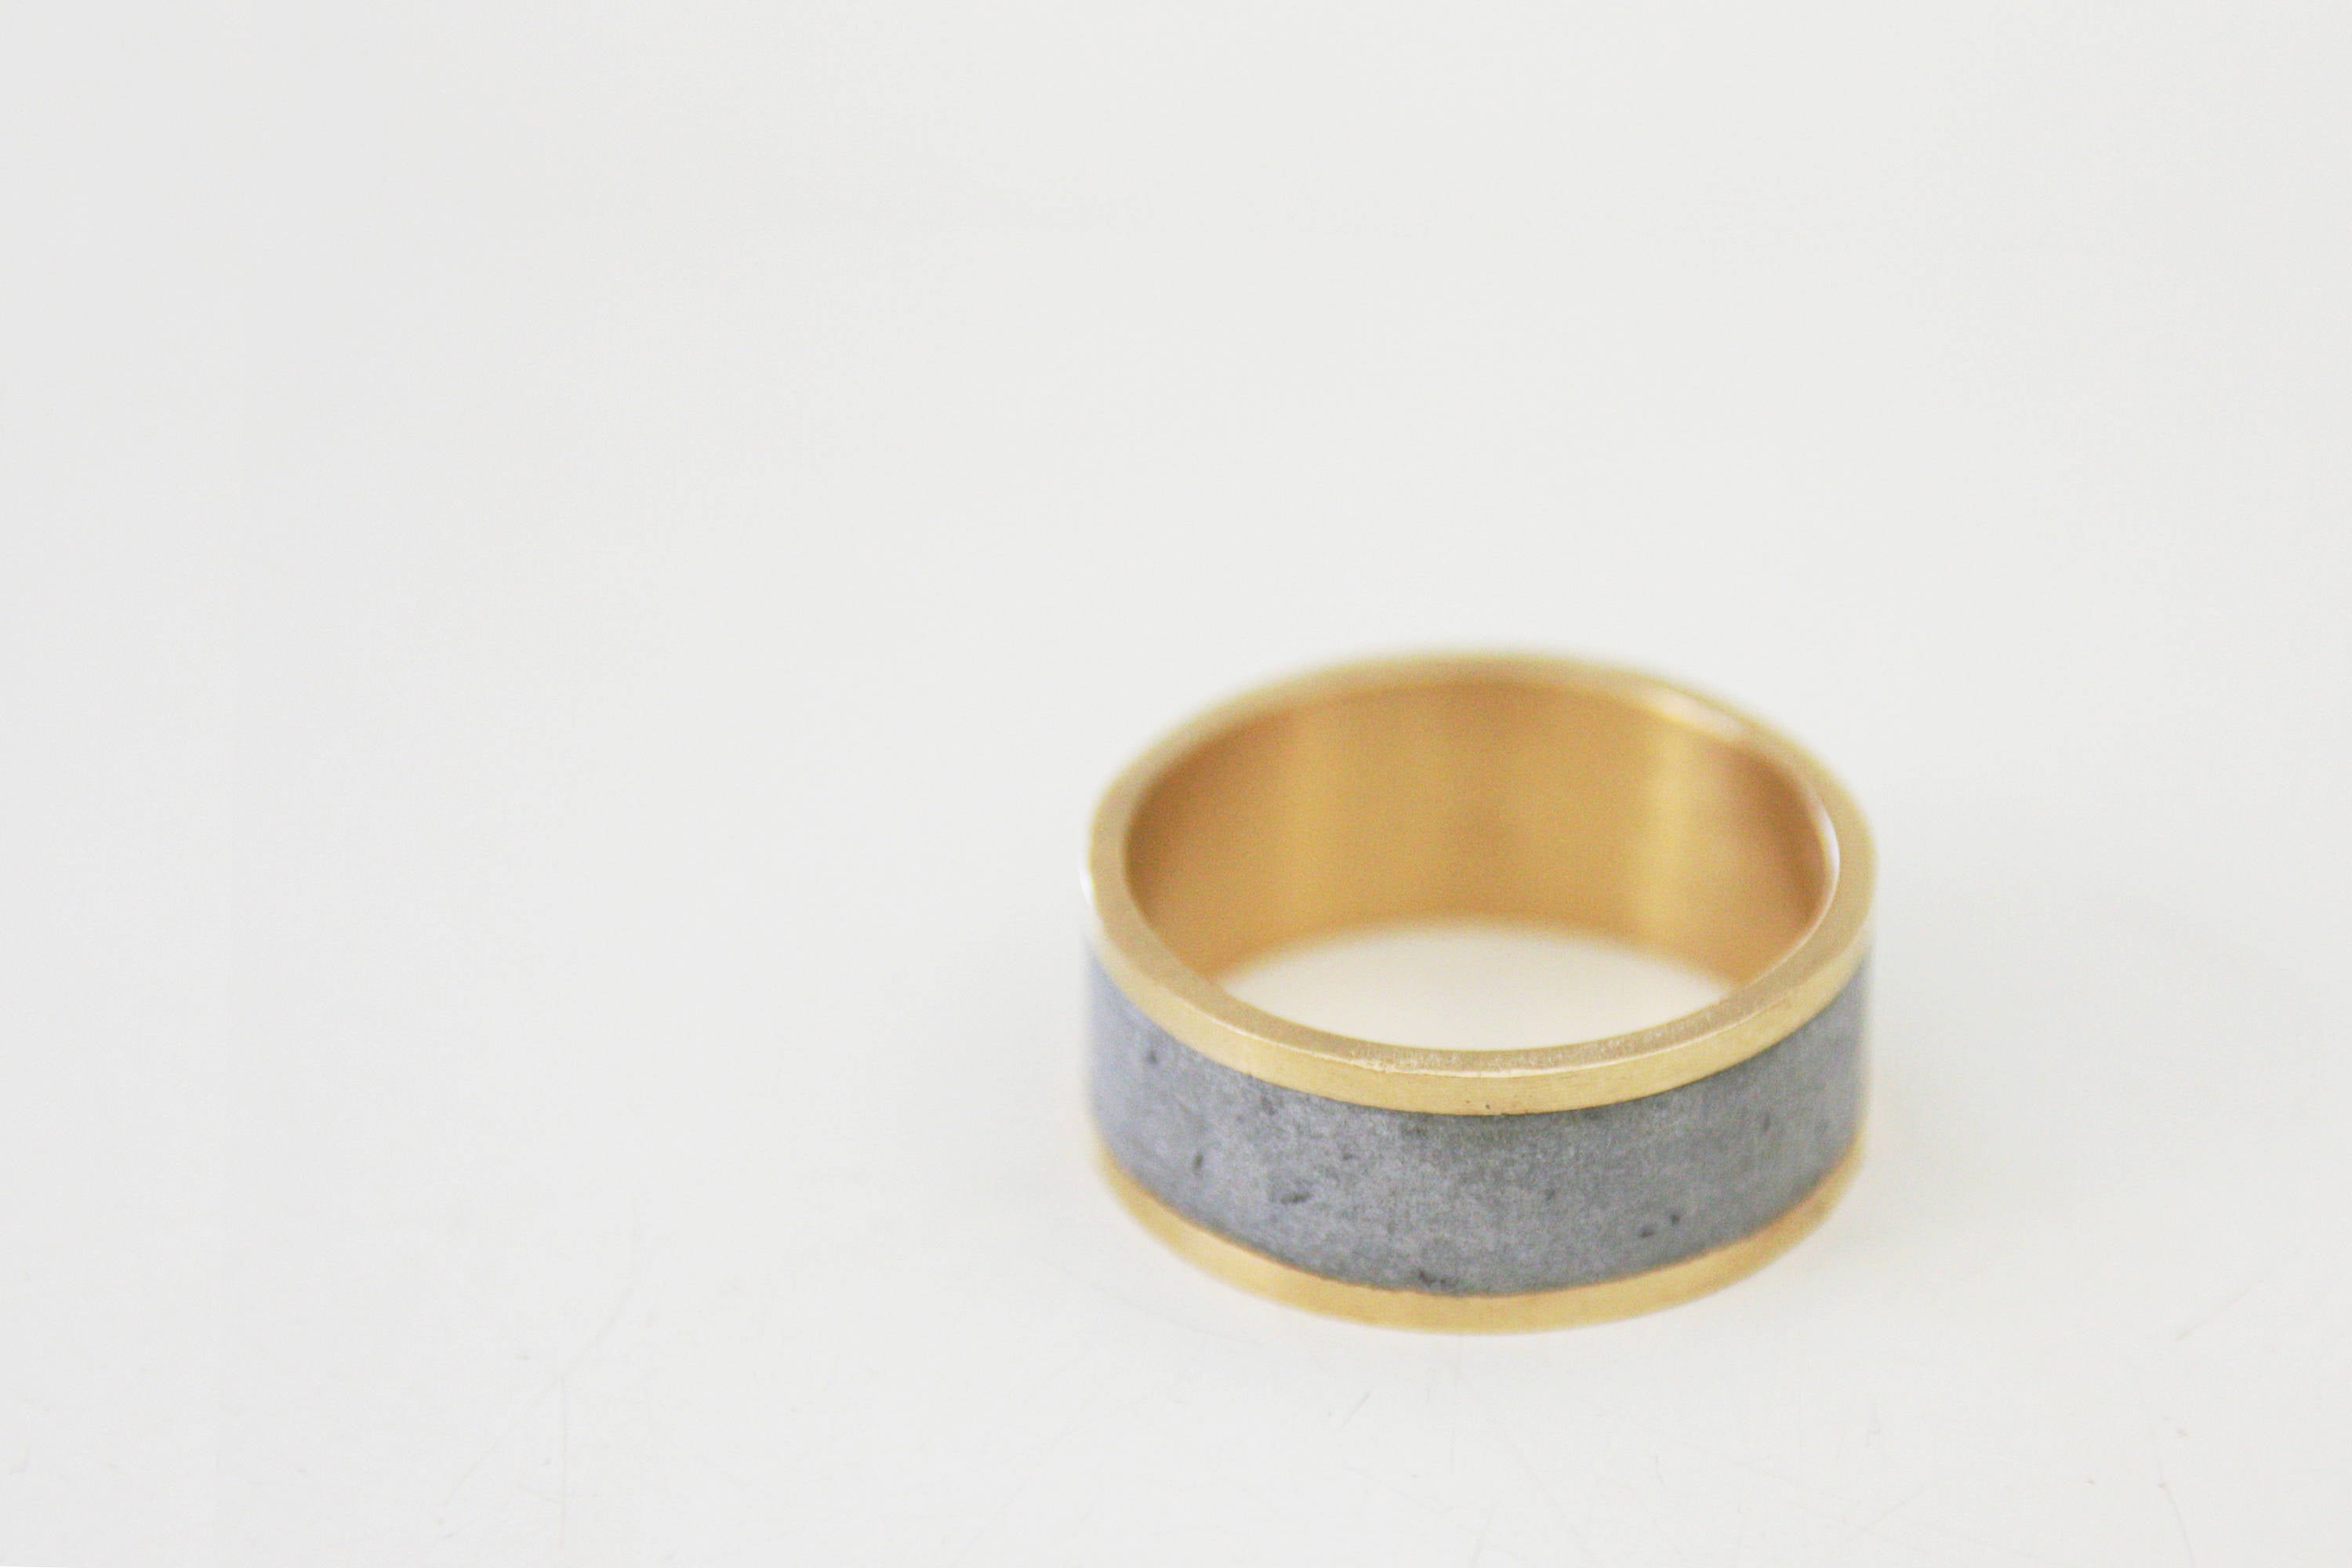 14K Yellow Gold And Concrete Wedding Ring / Wide Gold Wedding Band / Unisex Wedding Ring - hs